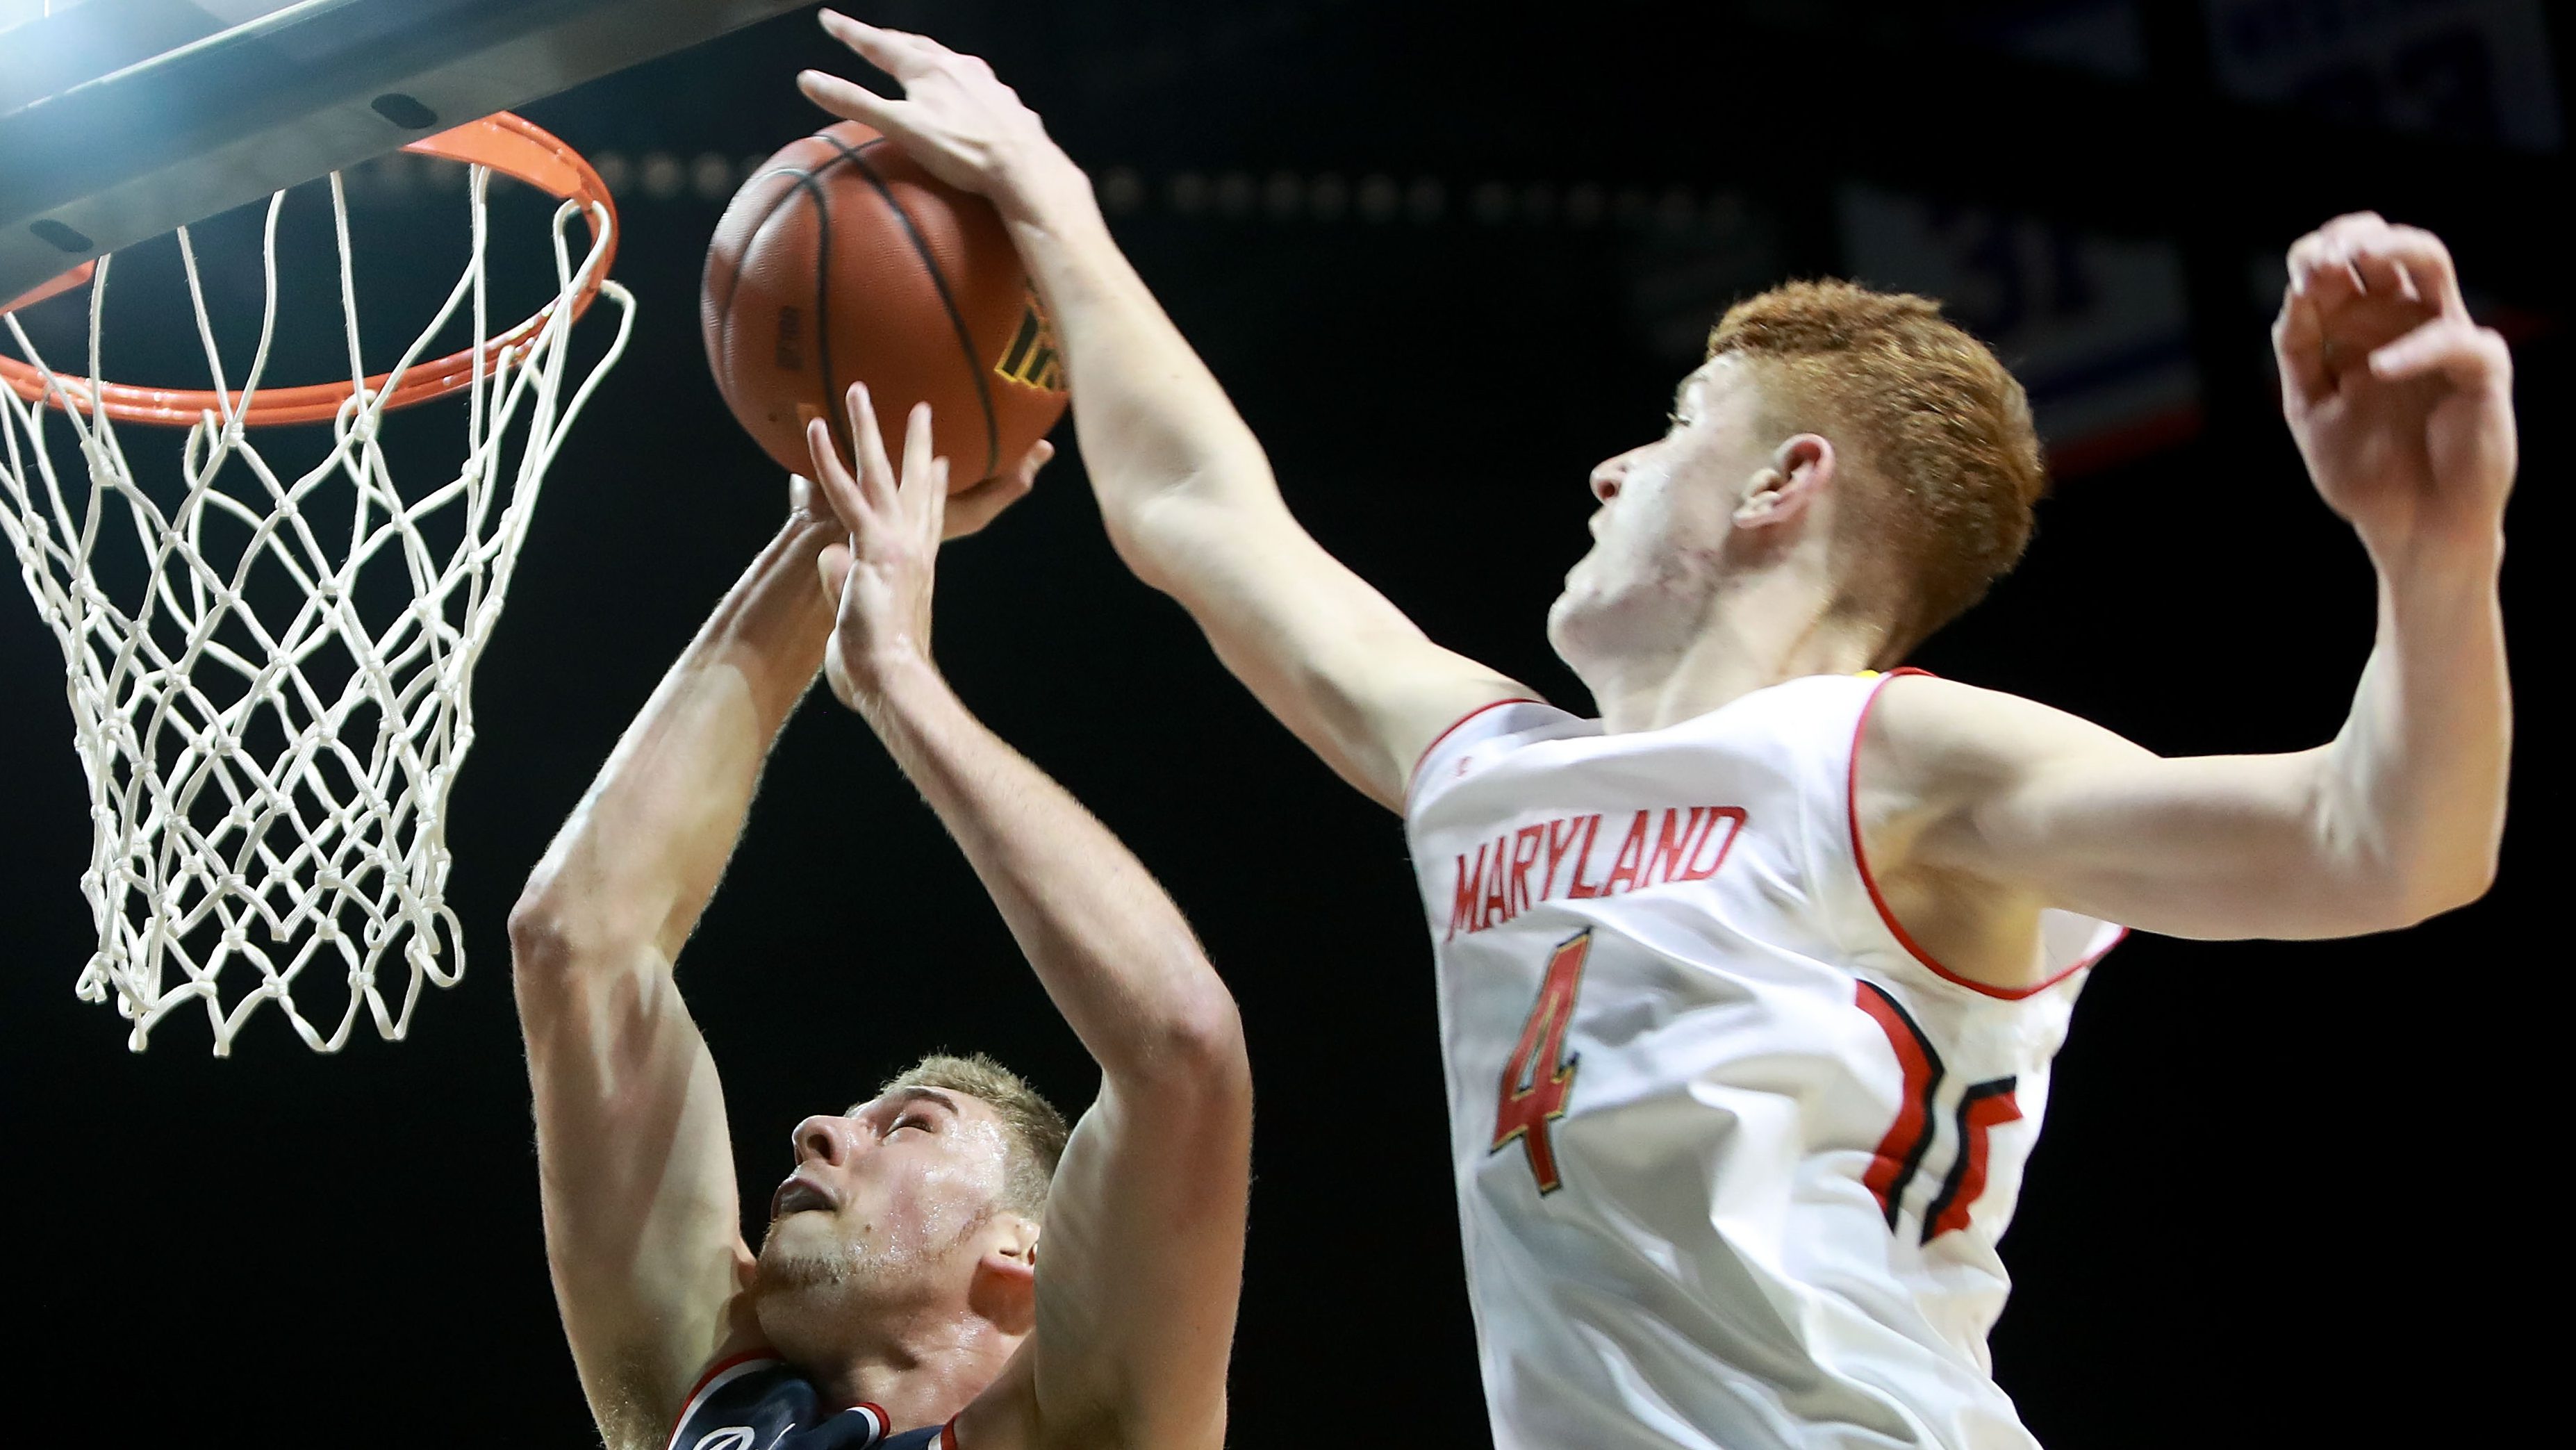 NEW YORK, NY - NOVEMBER 25:  Kevin Huerter #4 of the Maryland Terrapins blocks T.J. Cline #10 of the Richmond Spiders in the second half during the Barclays Center Classic at Barclays Center on November 25, 2016 in the Brooklyn borough of New York City.  (Photo by Michael Reaves/Getty Images)